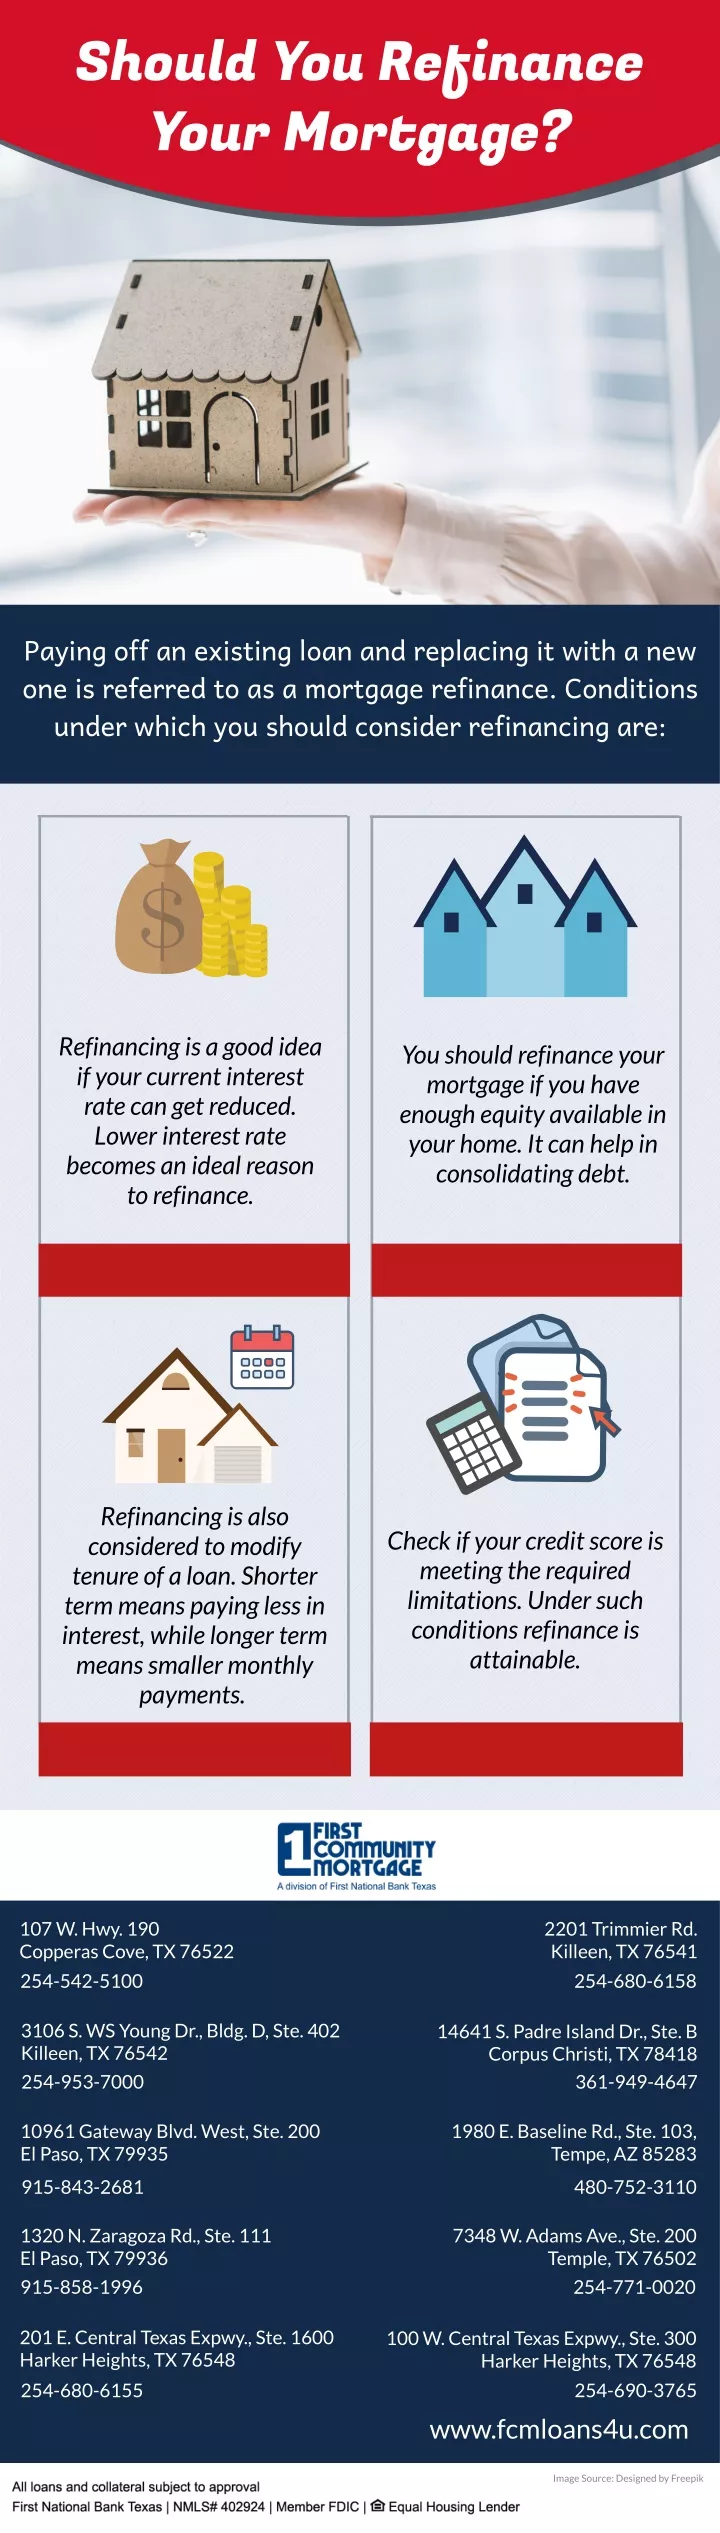 should you refinance your mortgage